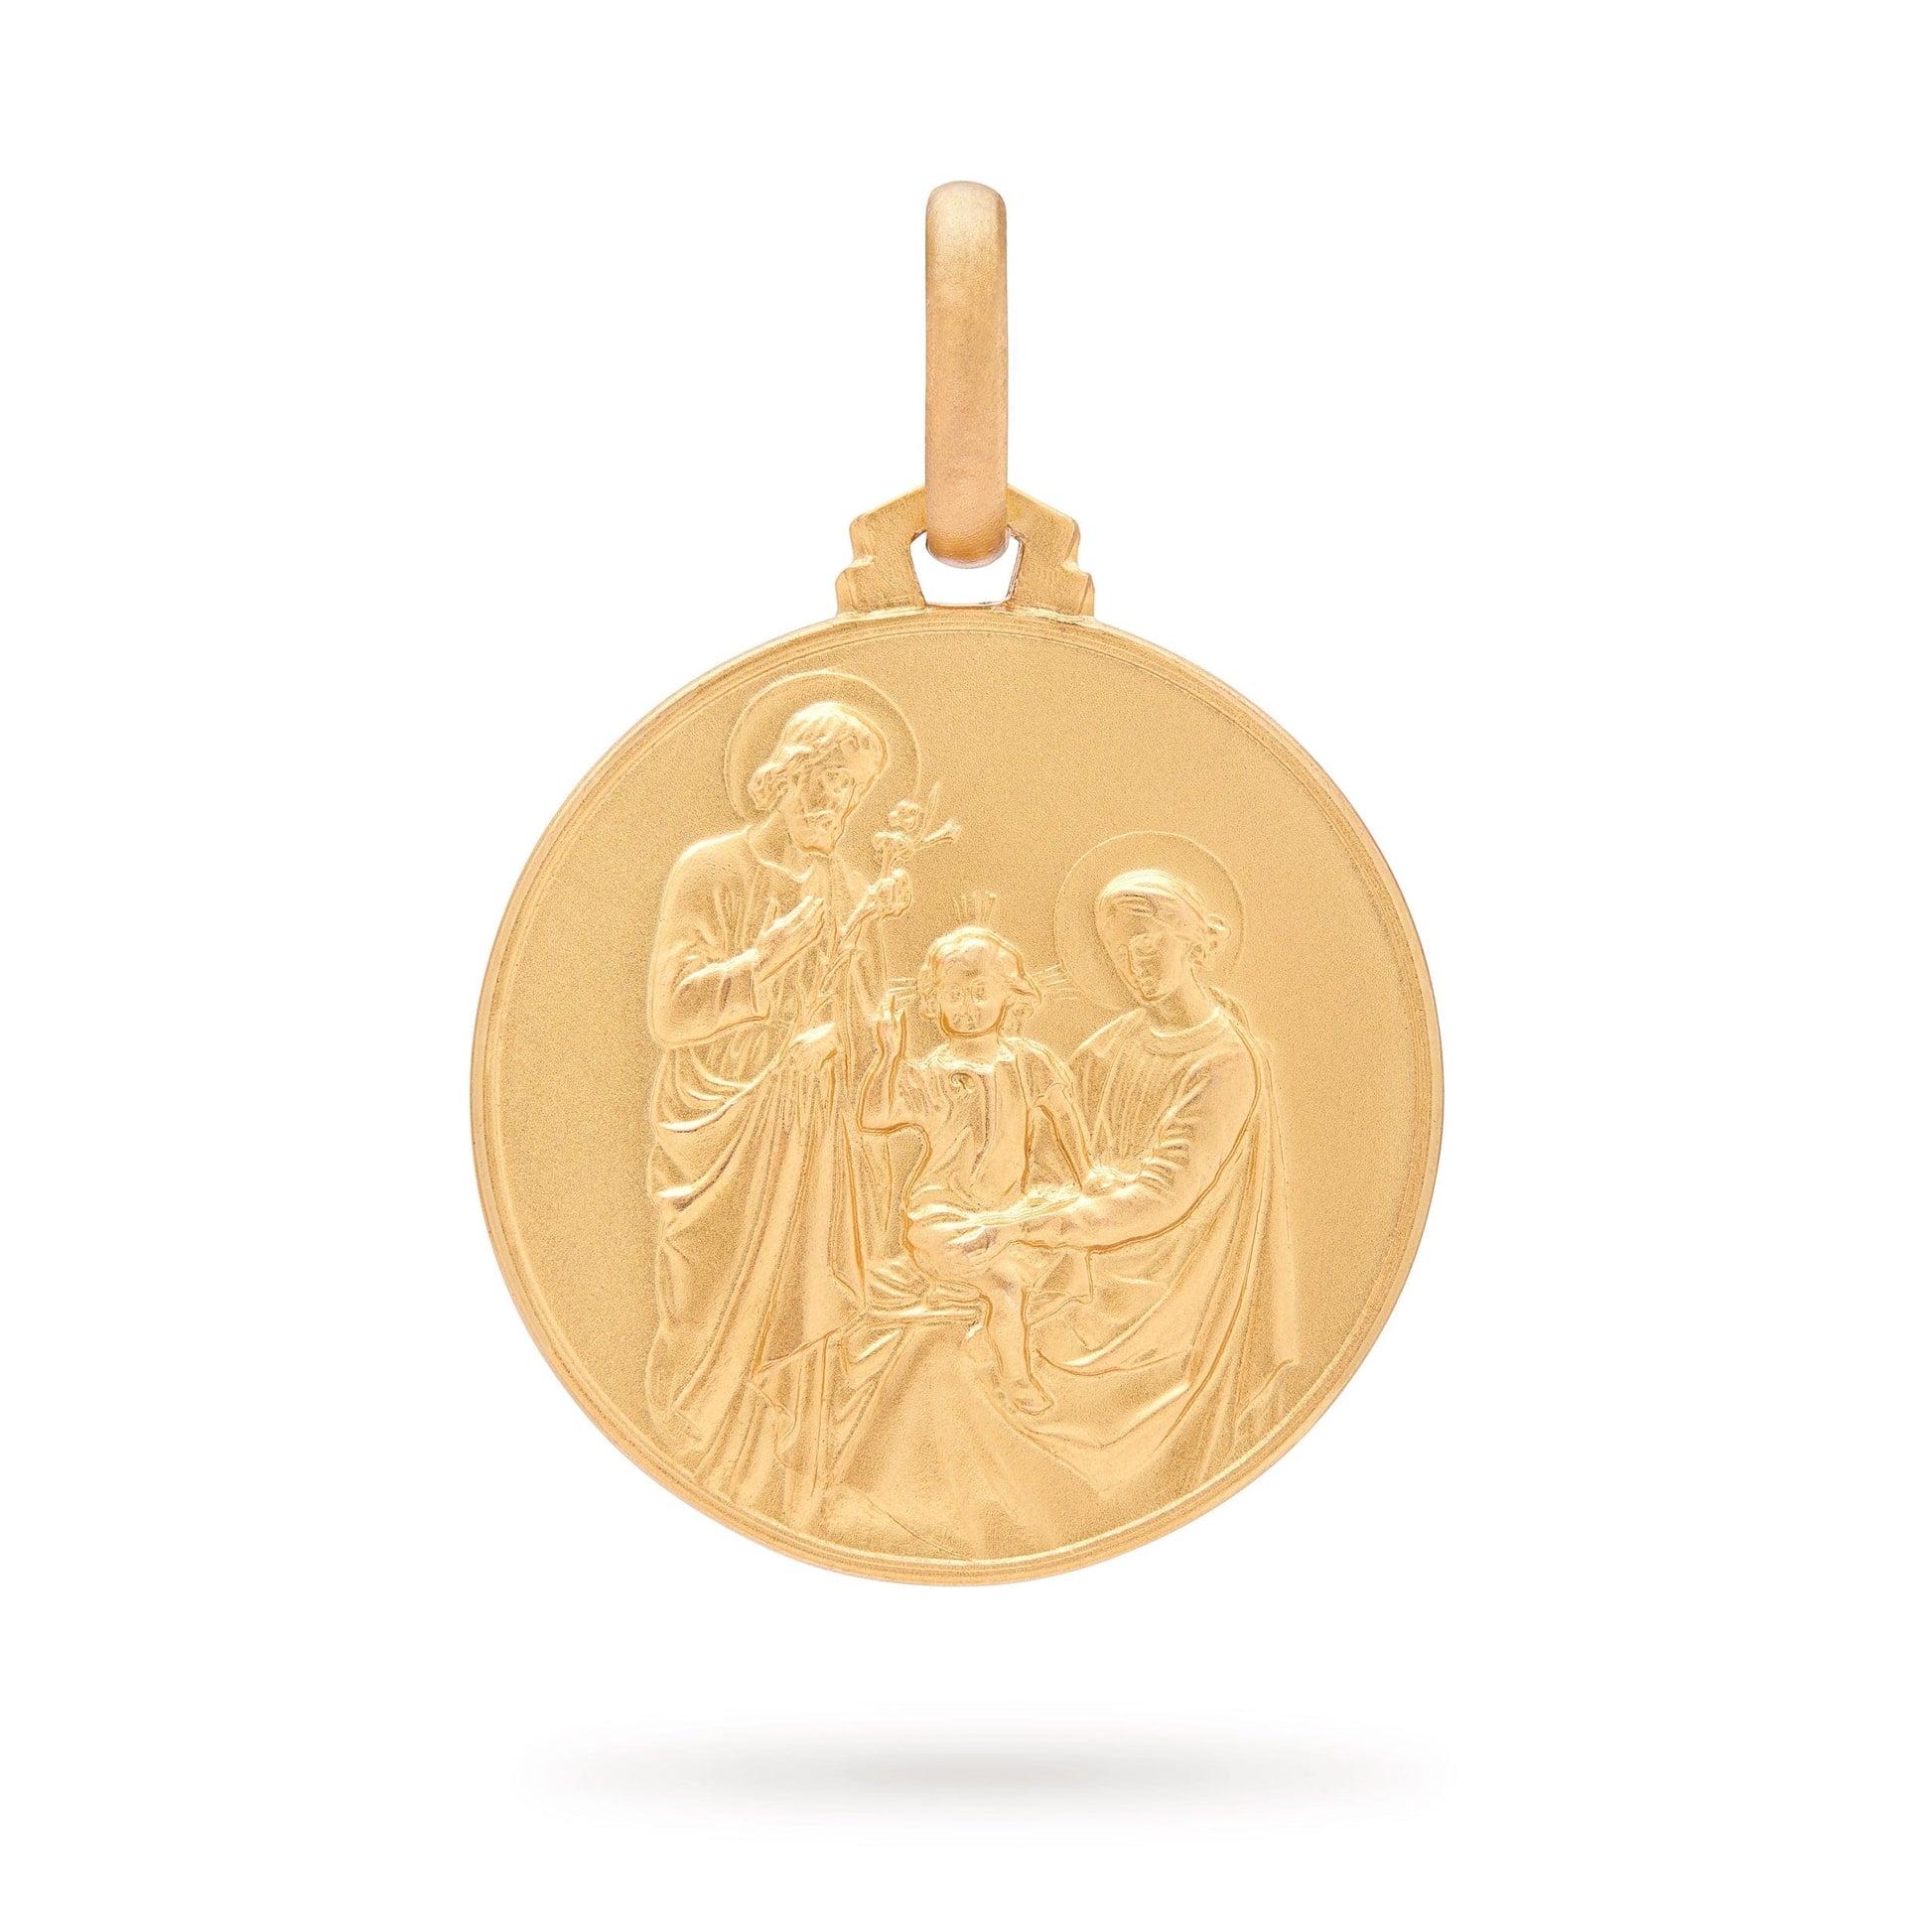 MONDO CATTOLICO 21 mm Gold medal of Holy Family